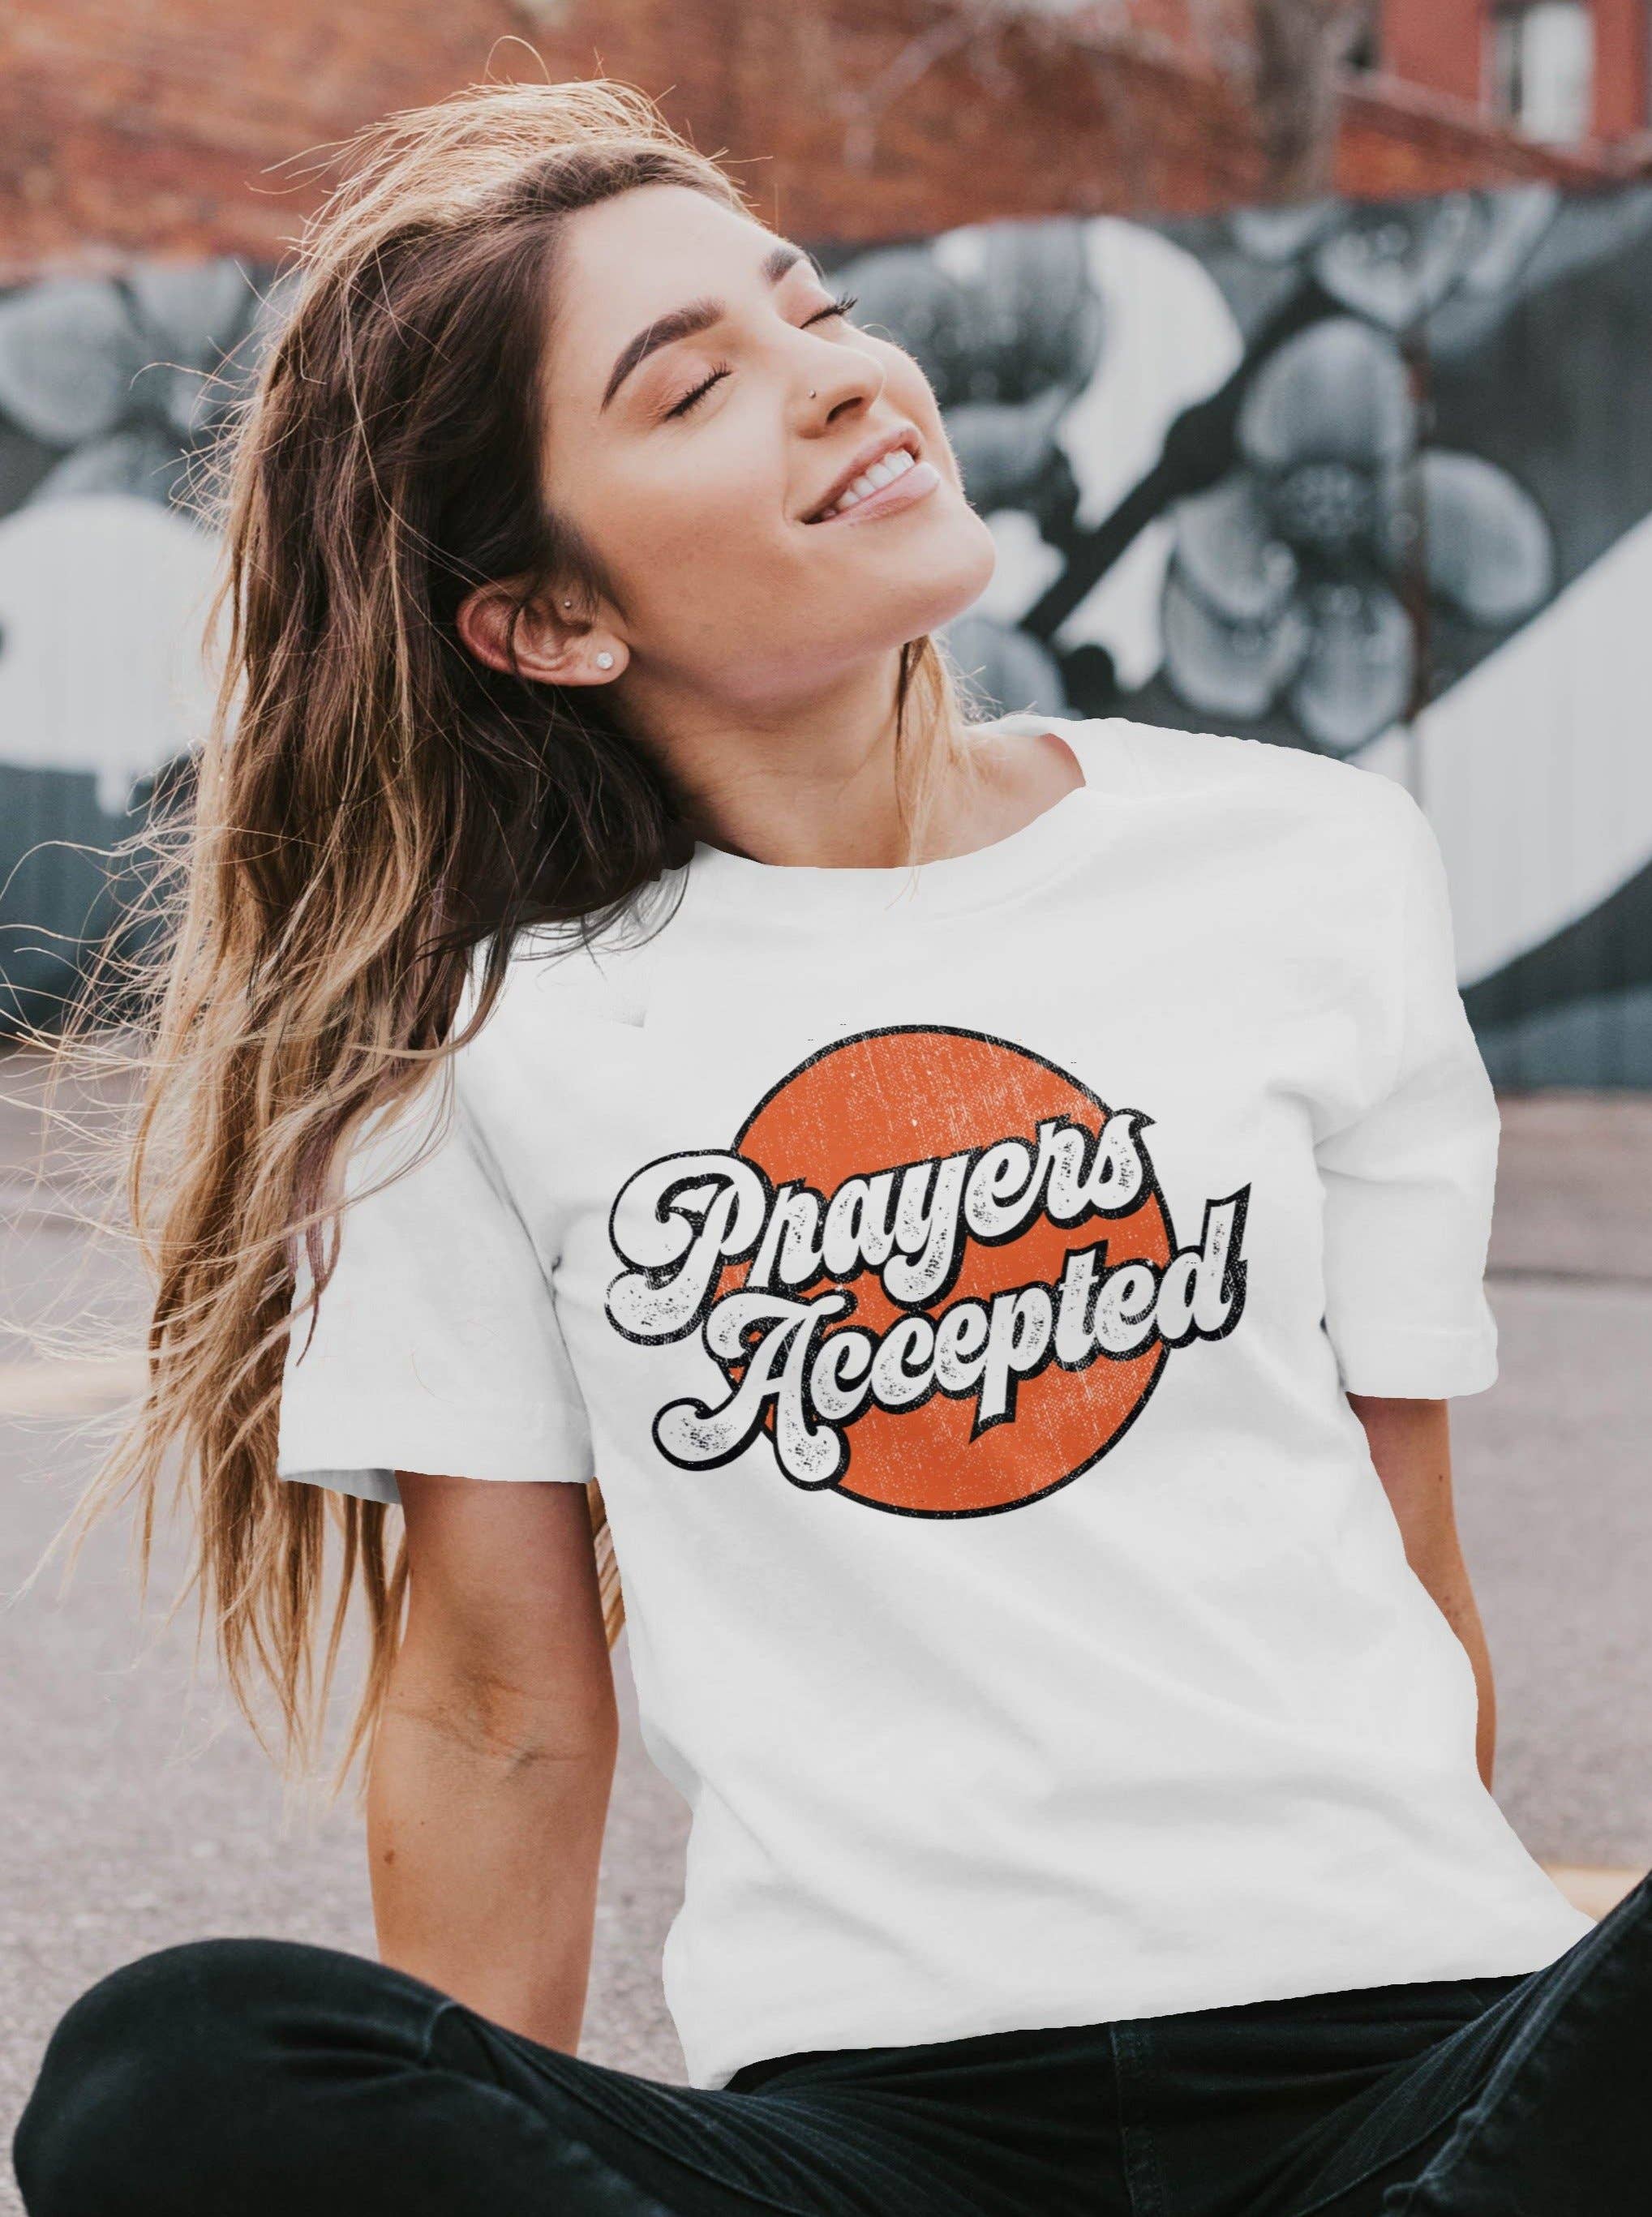 Prayers Accepted | Christian T-Shirt | Ruby’s Rubbish®